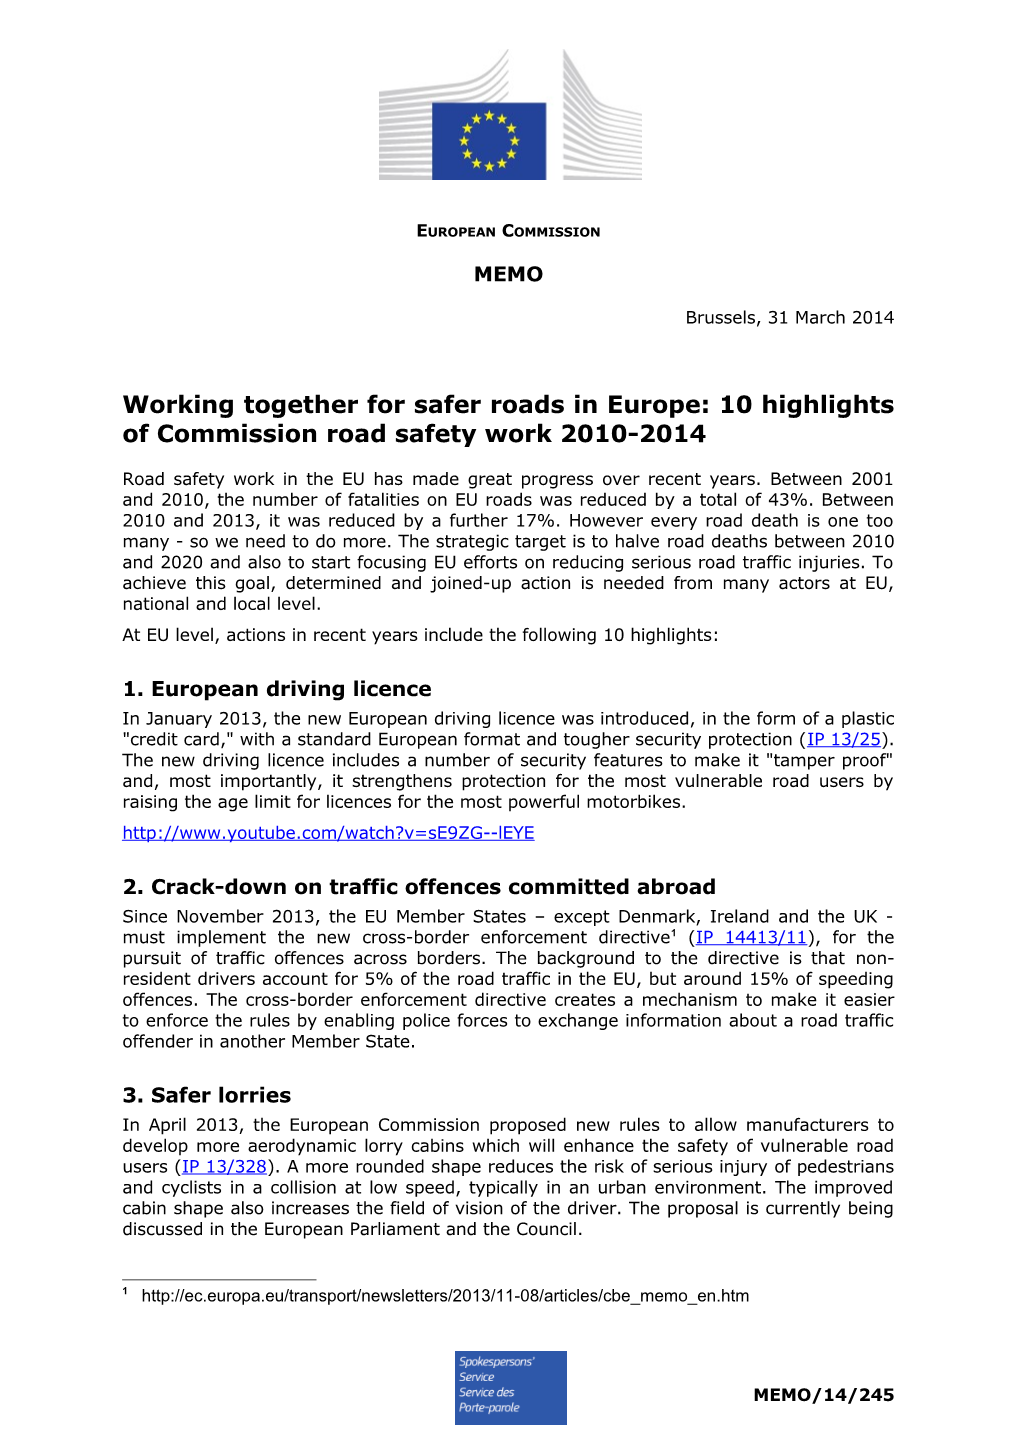 Working Together for Safer Roads in Europe: 10 Highlights of Commission Road Safety Work